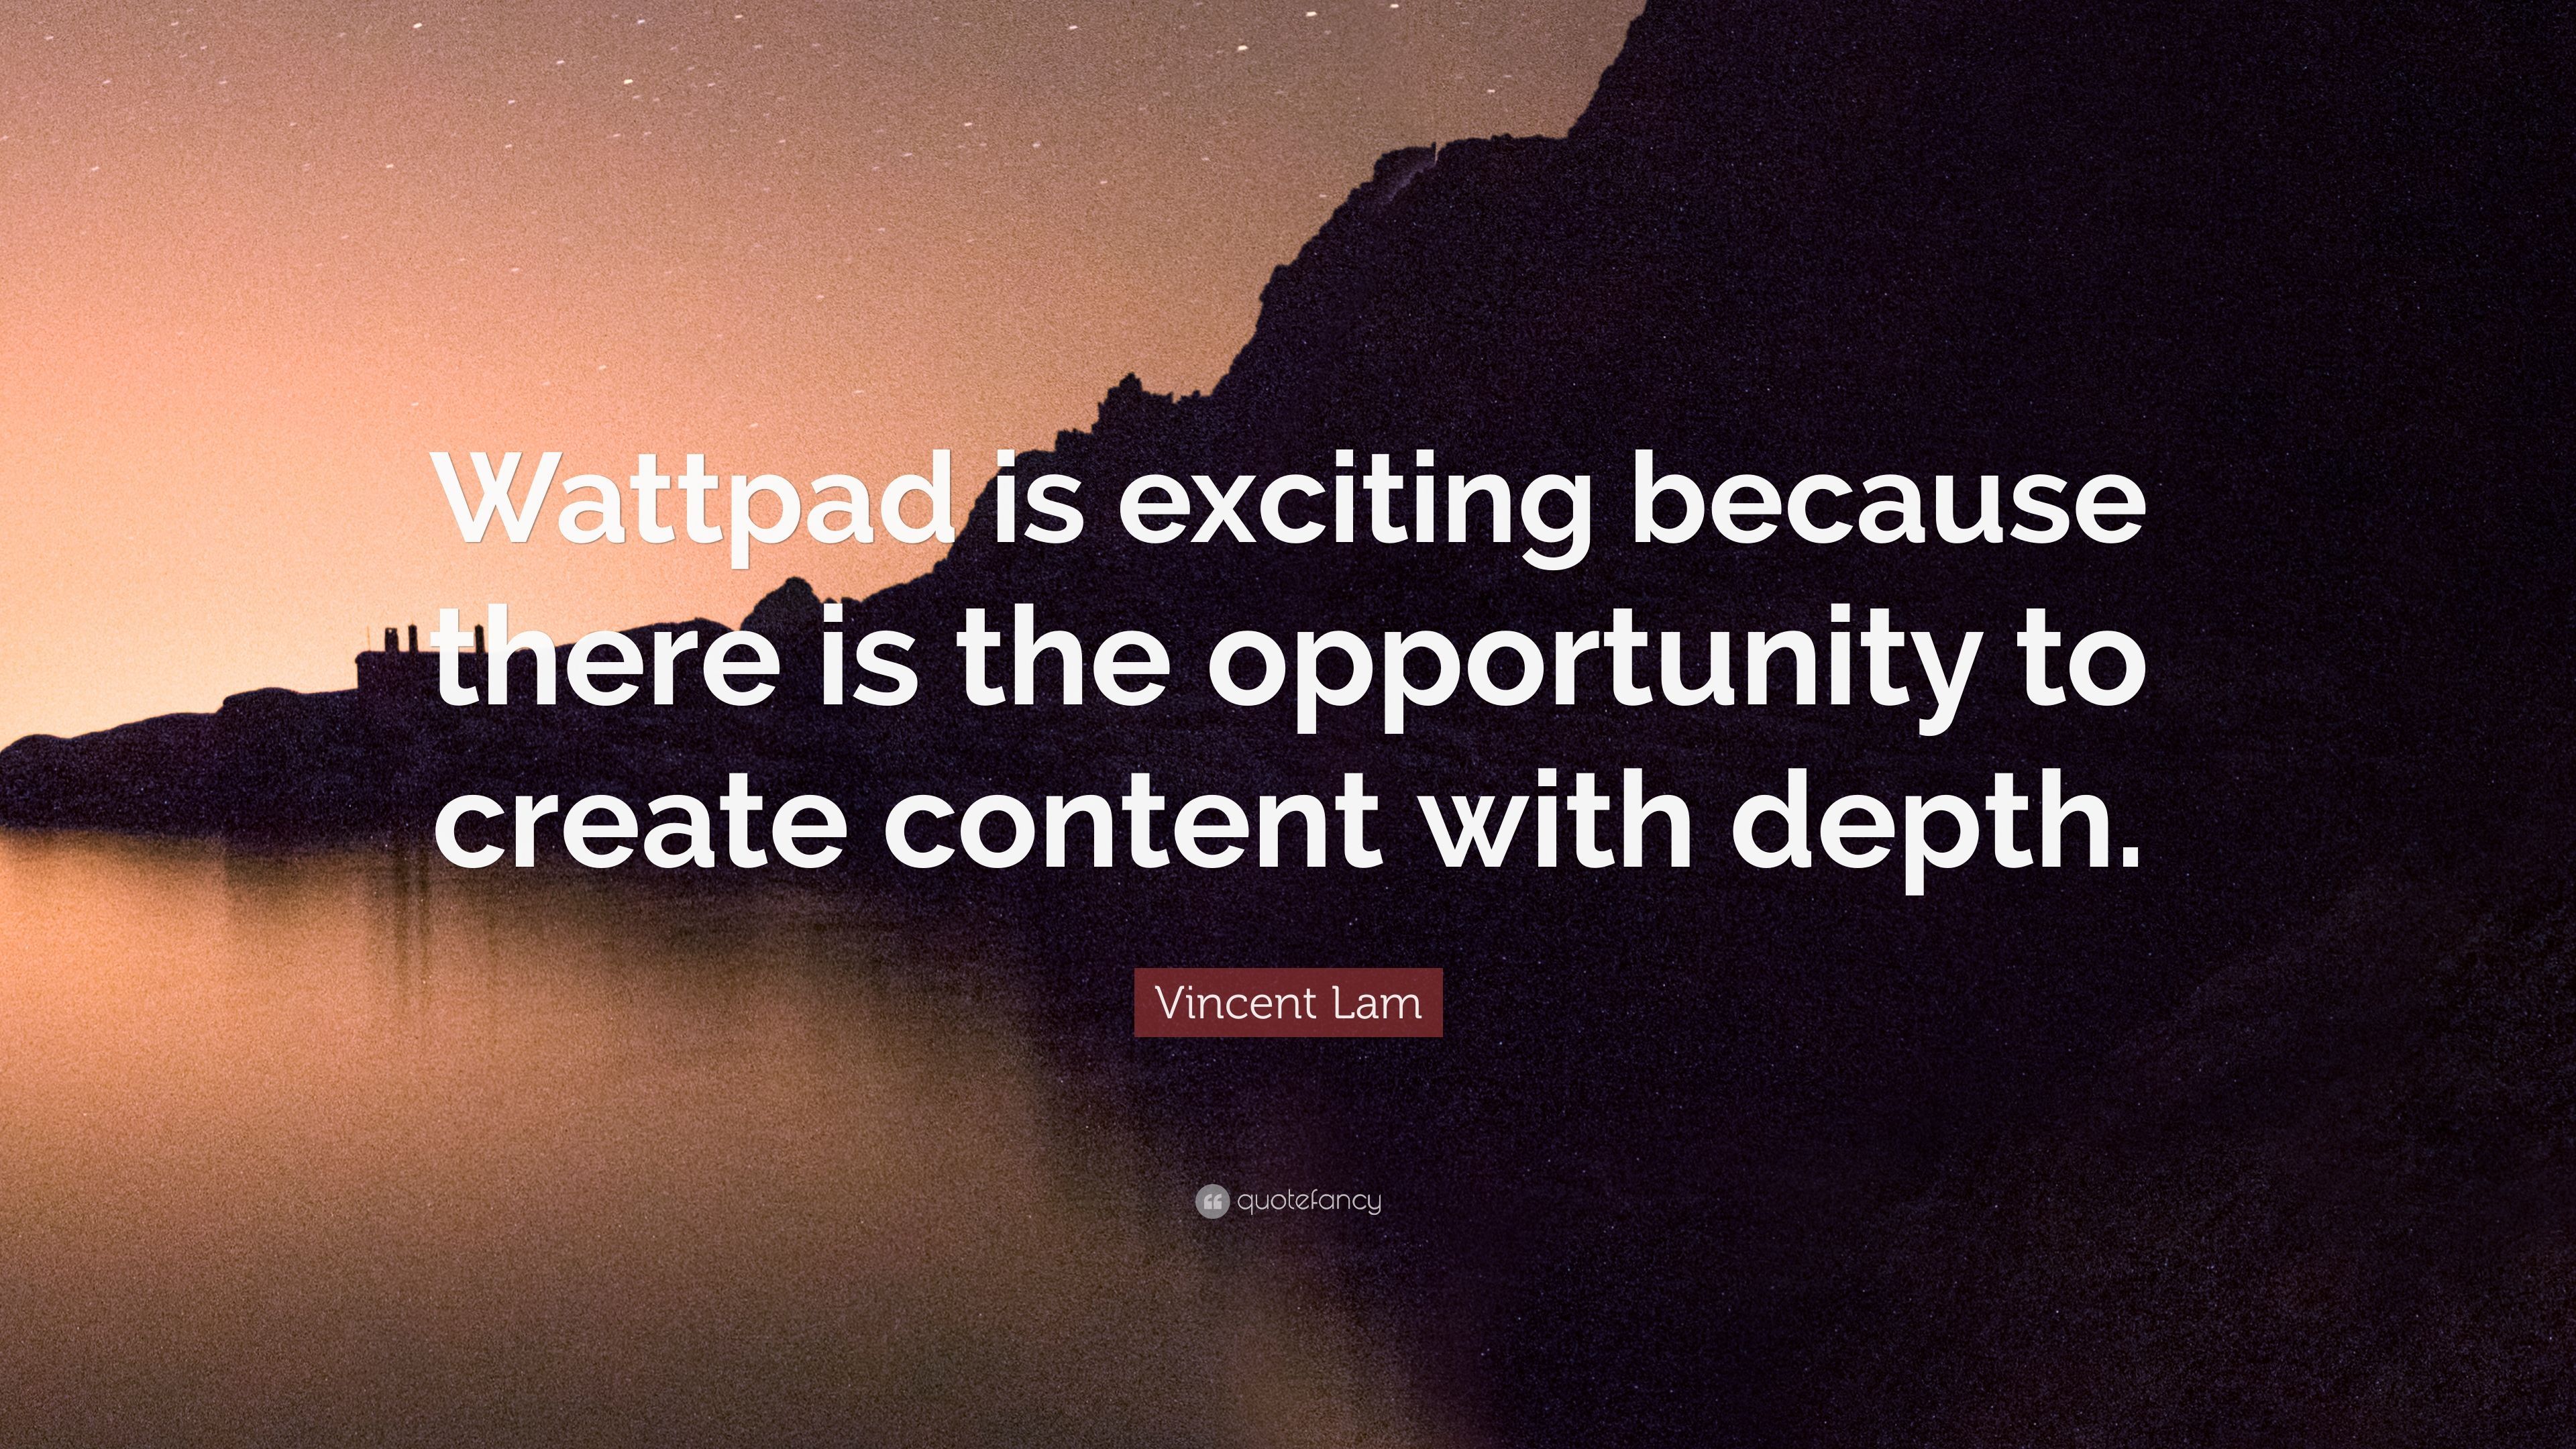 Vincent Lam Quote: “Wattpad is exciting because there is